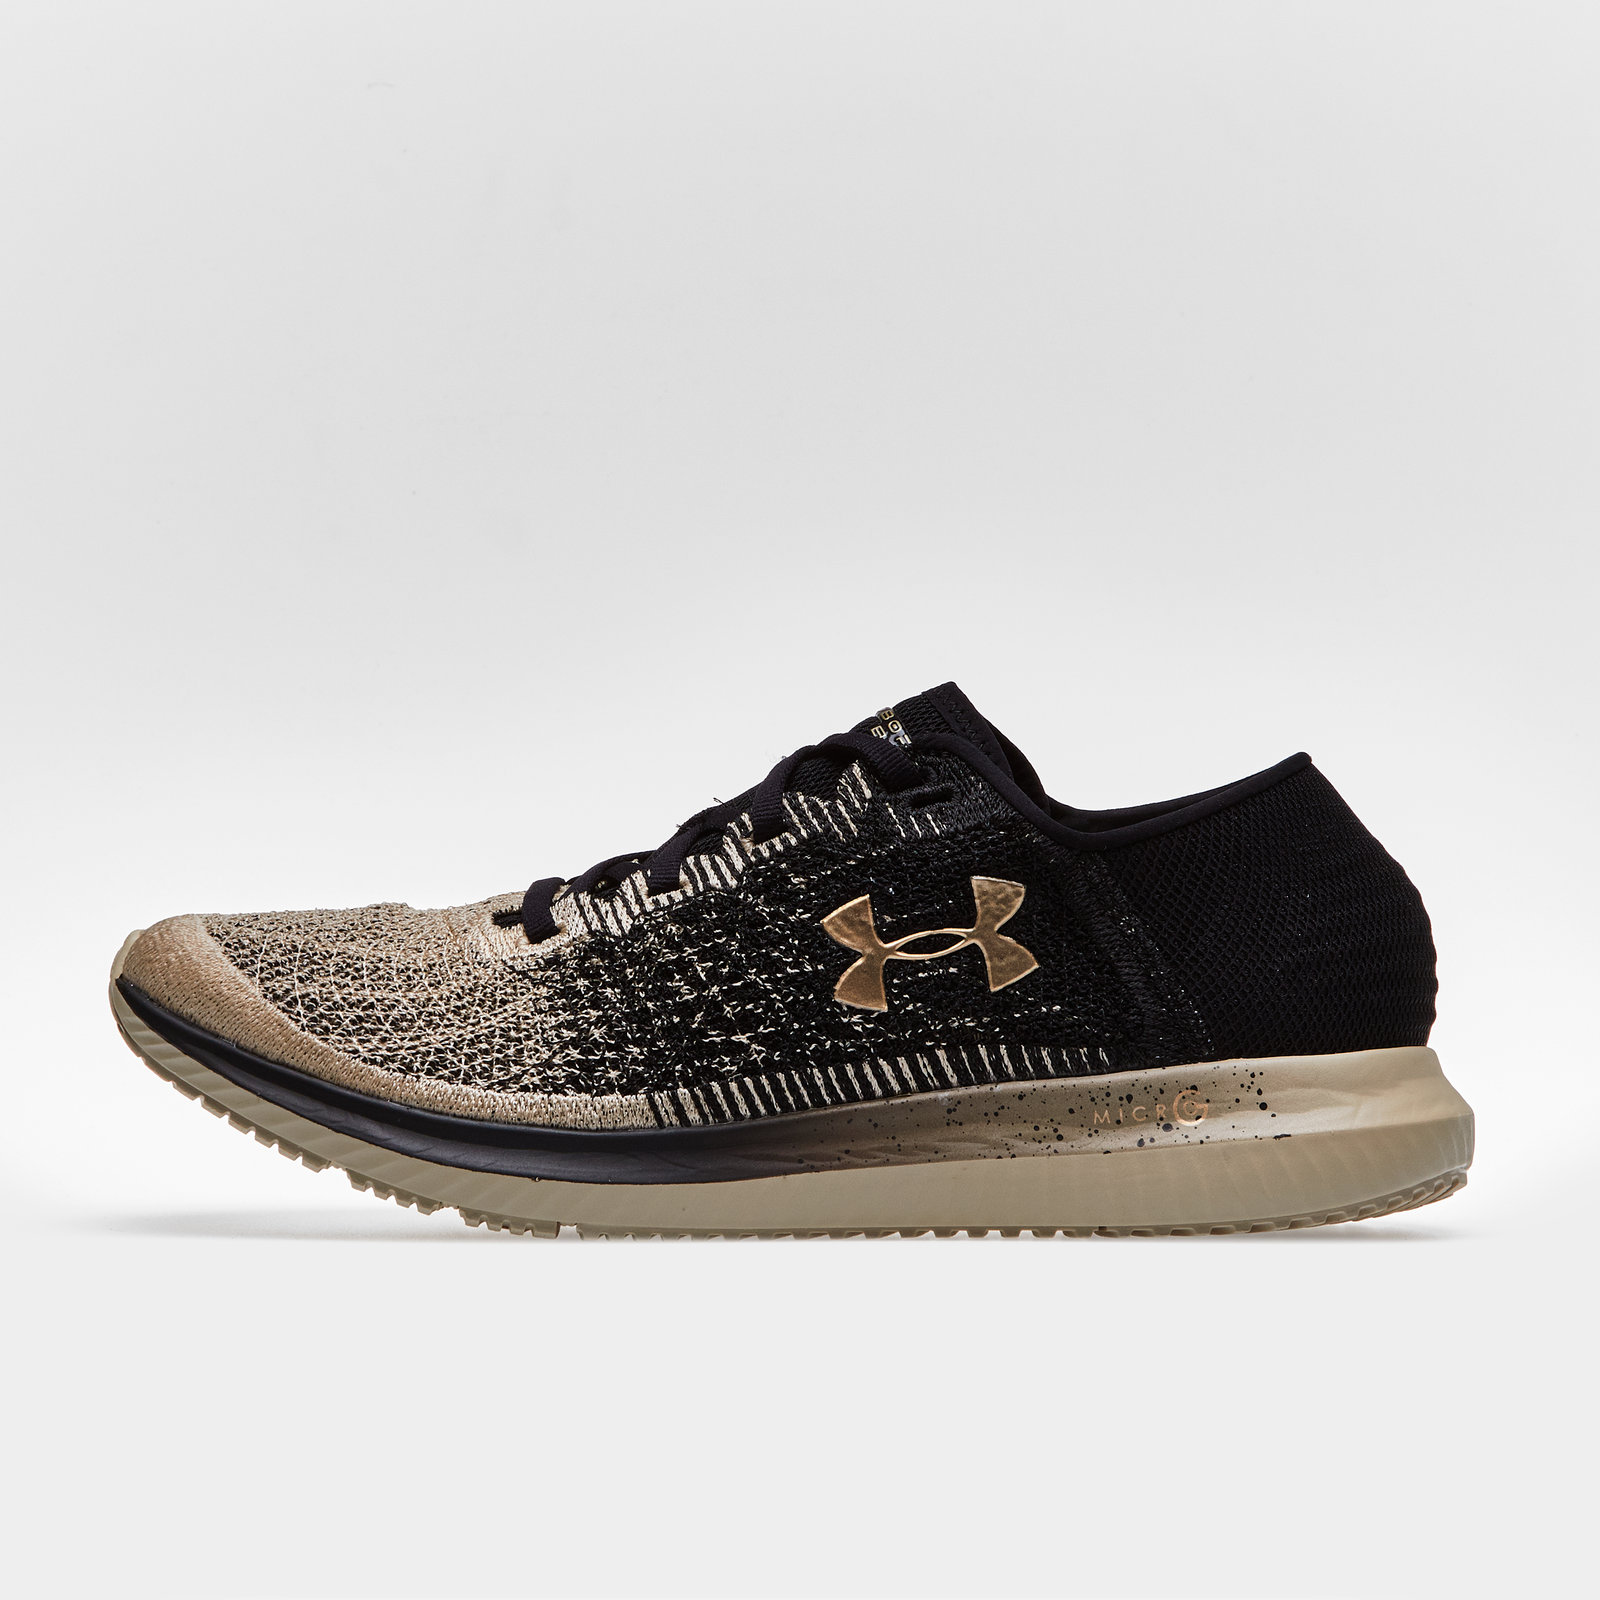 under armour blur running shoes mens